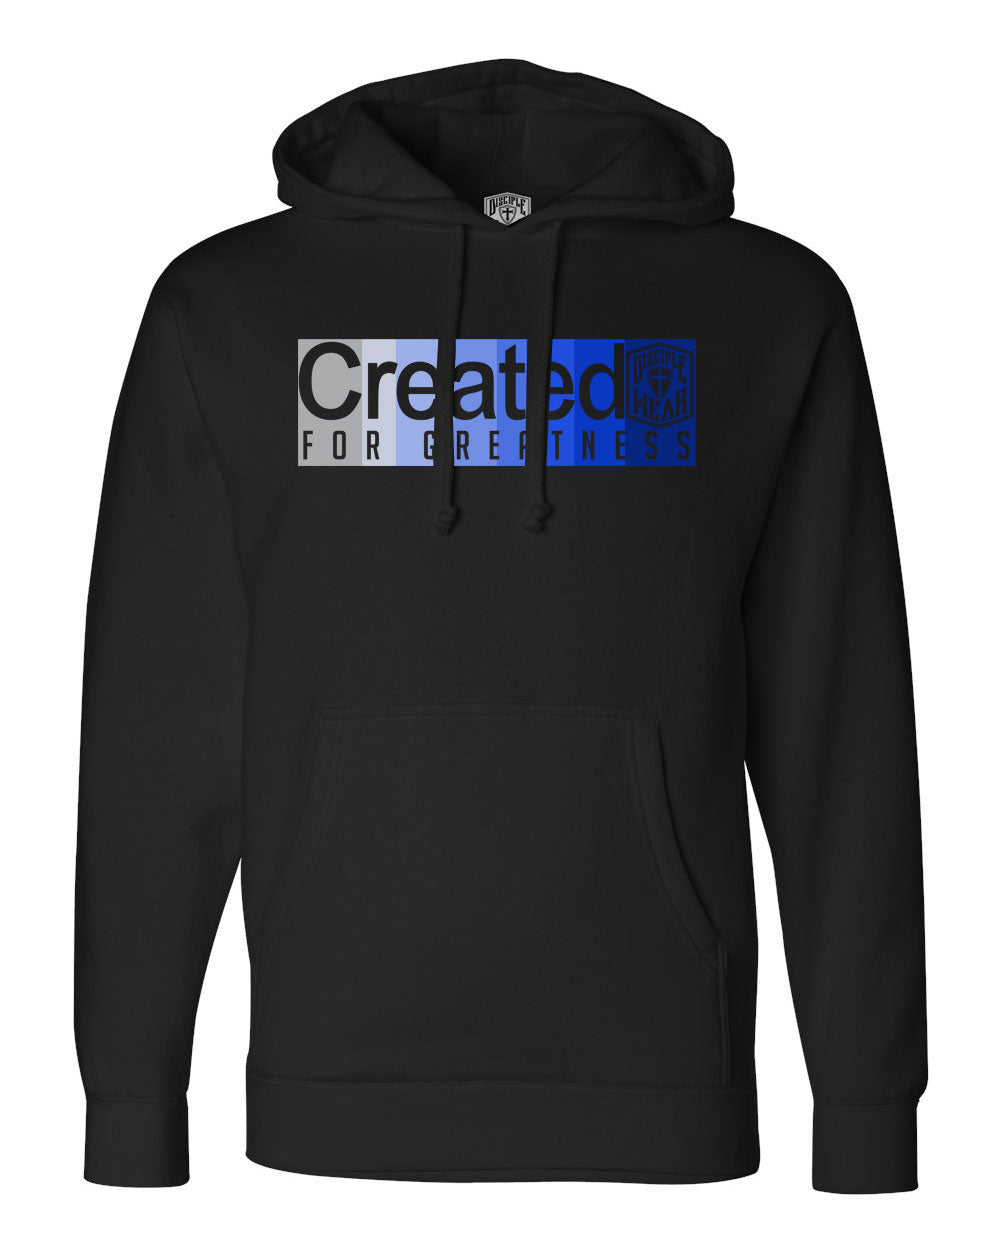 CREATED FOR GREATNESS HOODIE